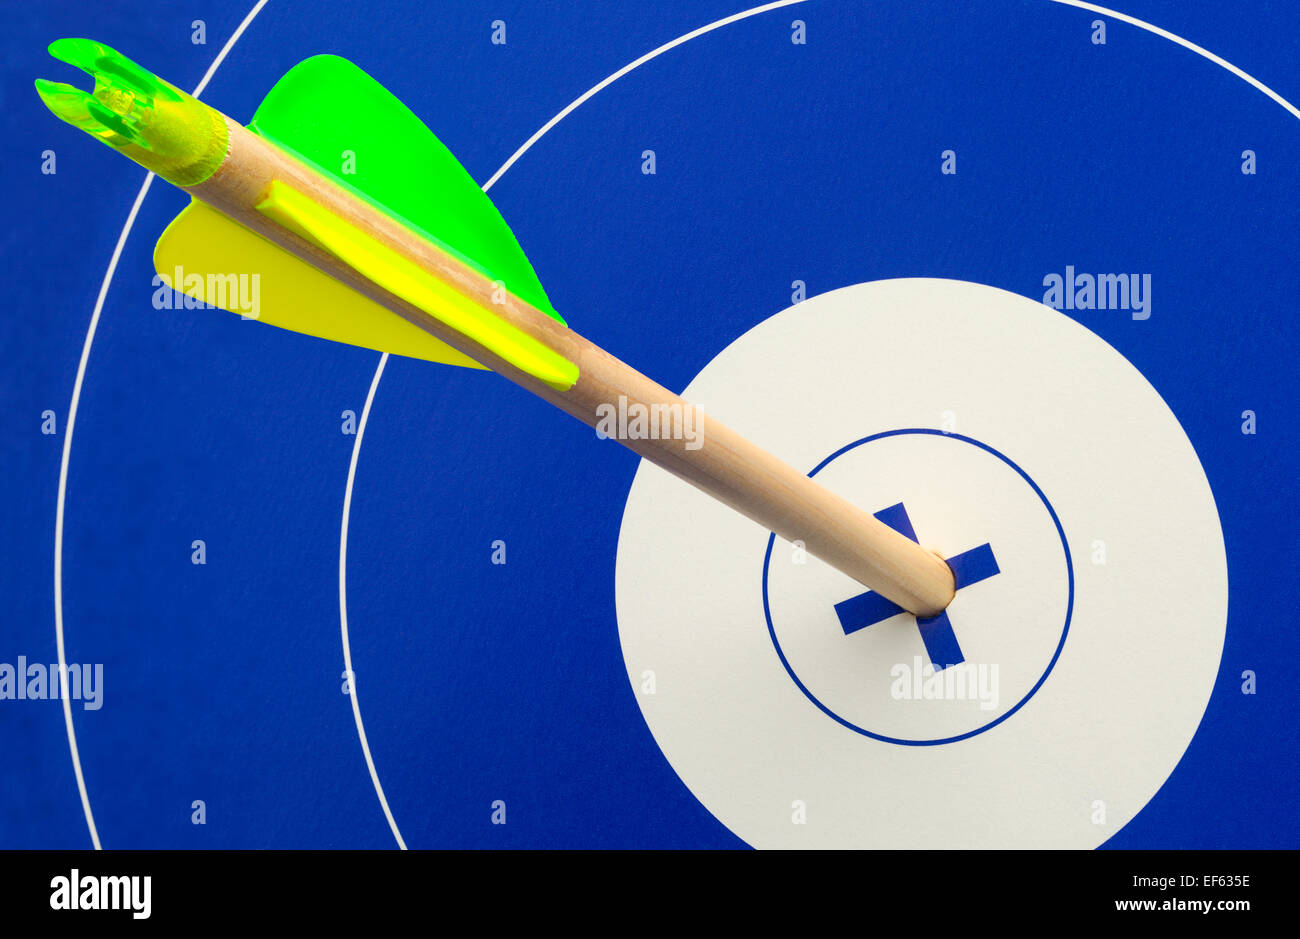 Single Wood Arrow in Center of Blue and White Target. Stock Photo